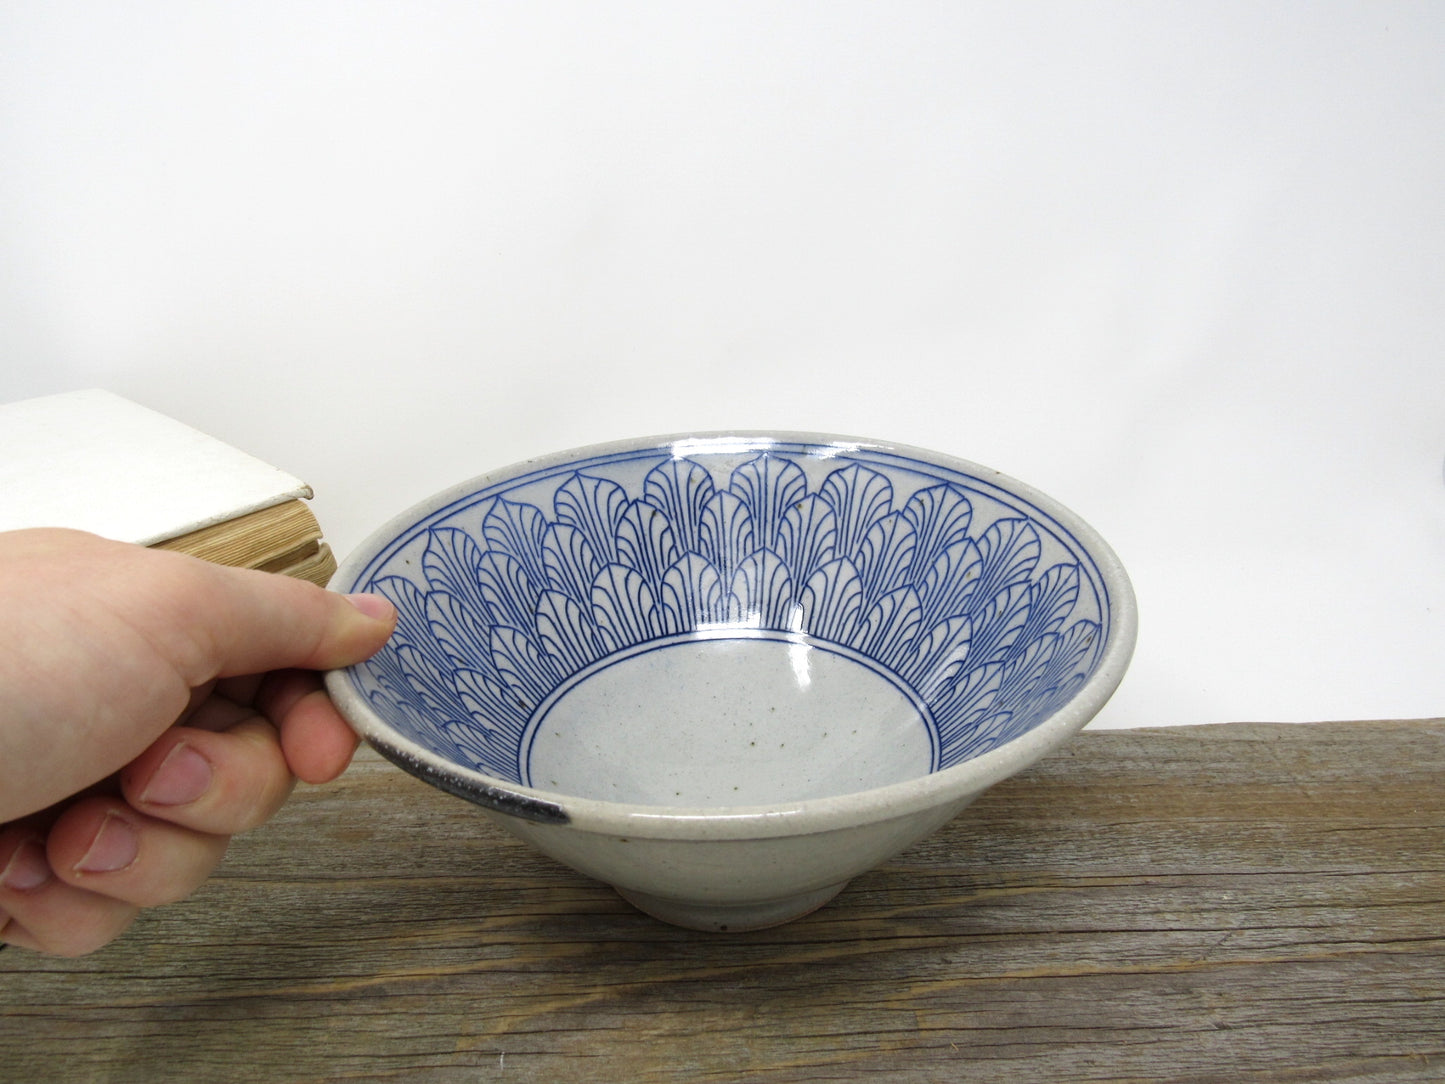 Art Deco Arches Ramen Bowl #1 in Blue and Gray